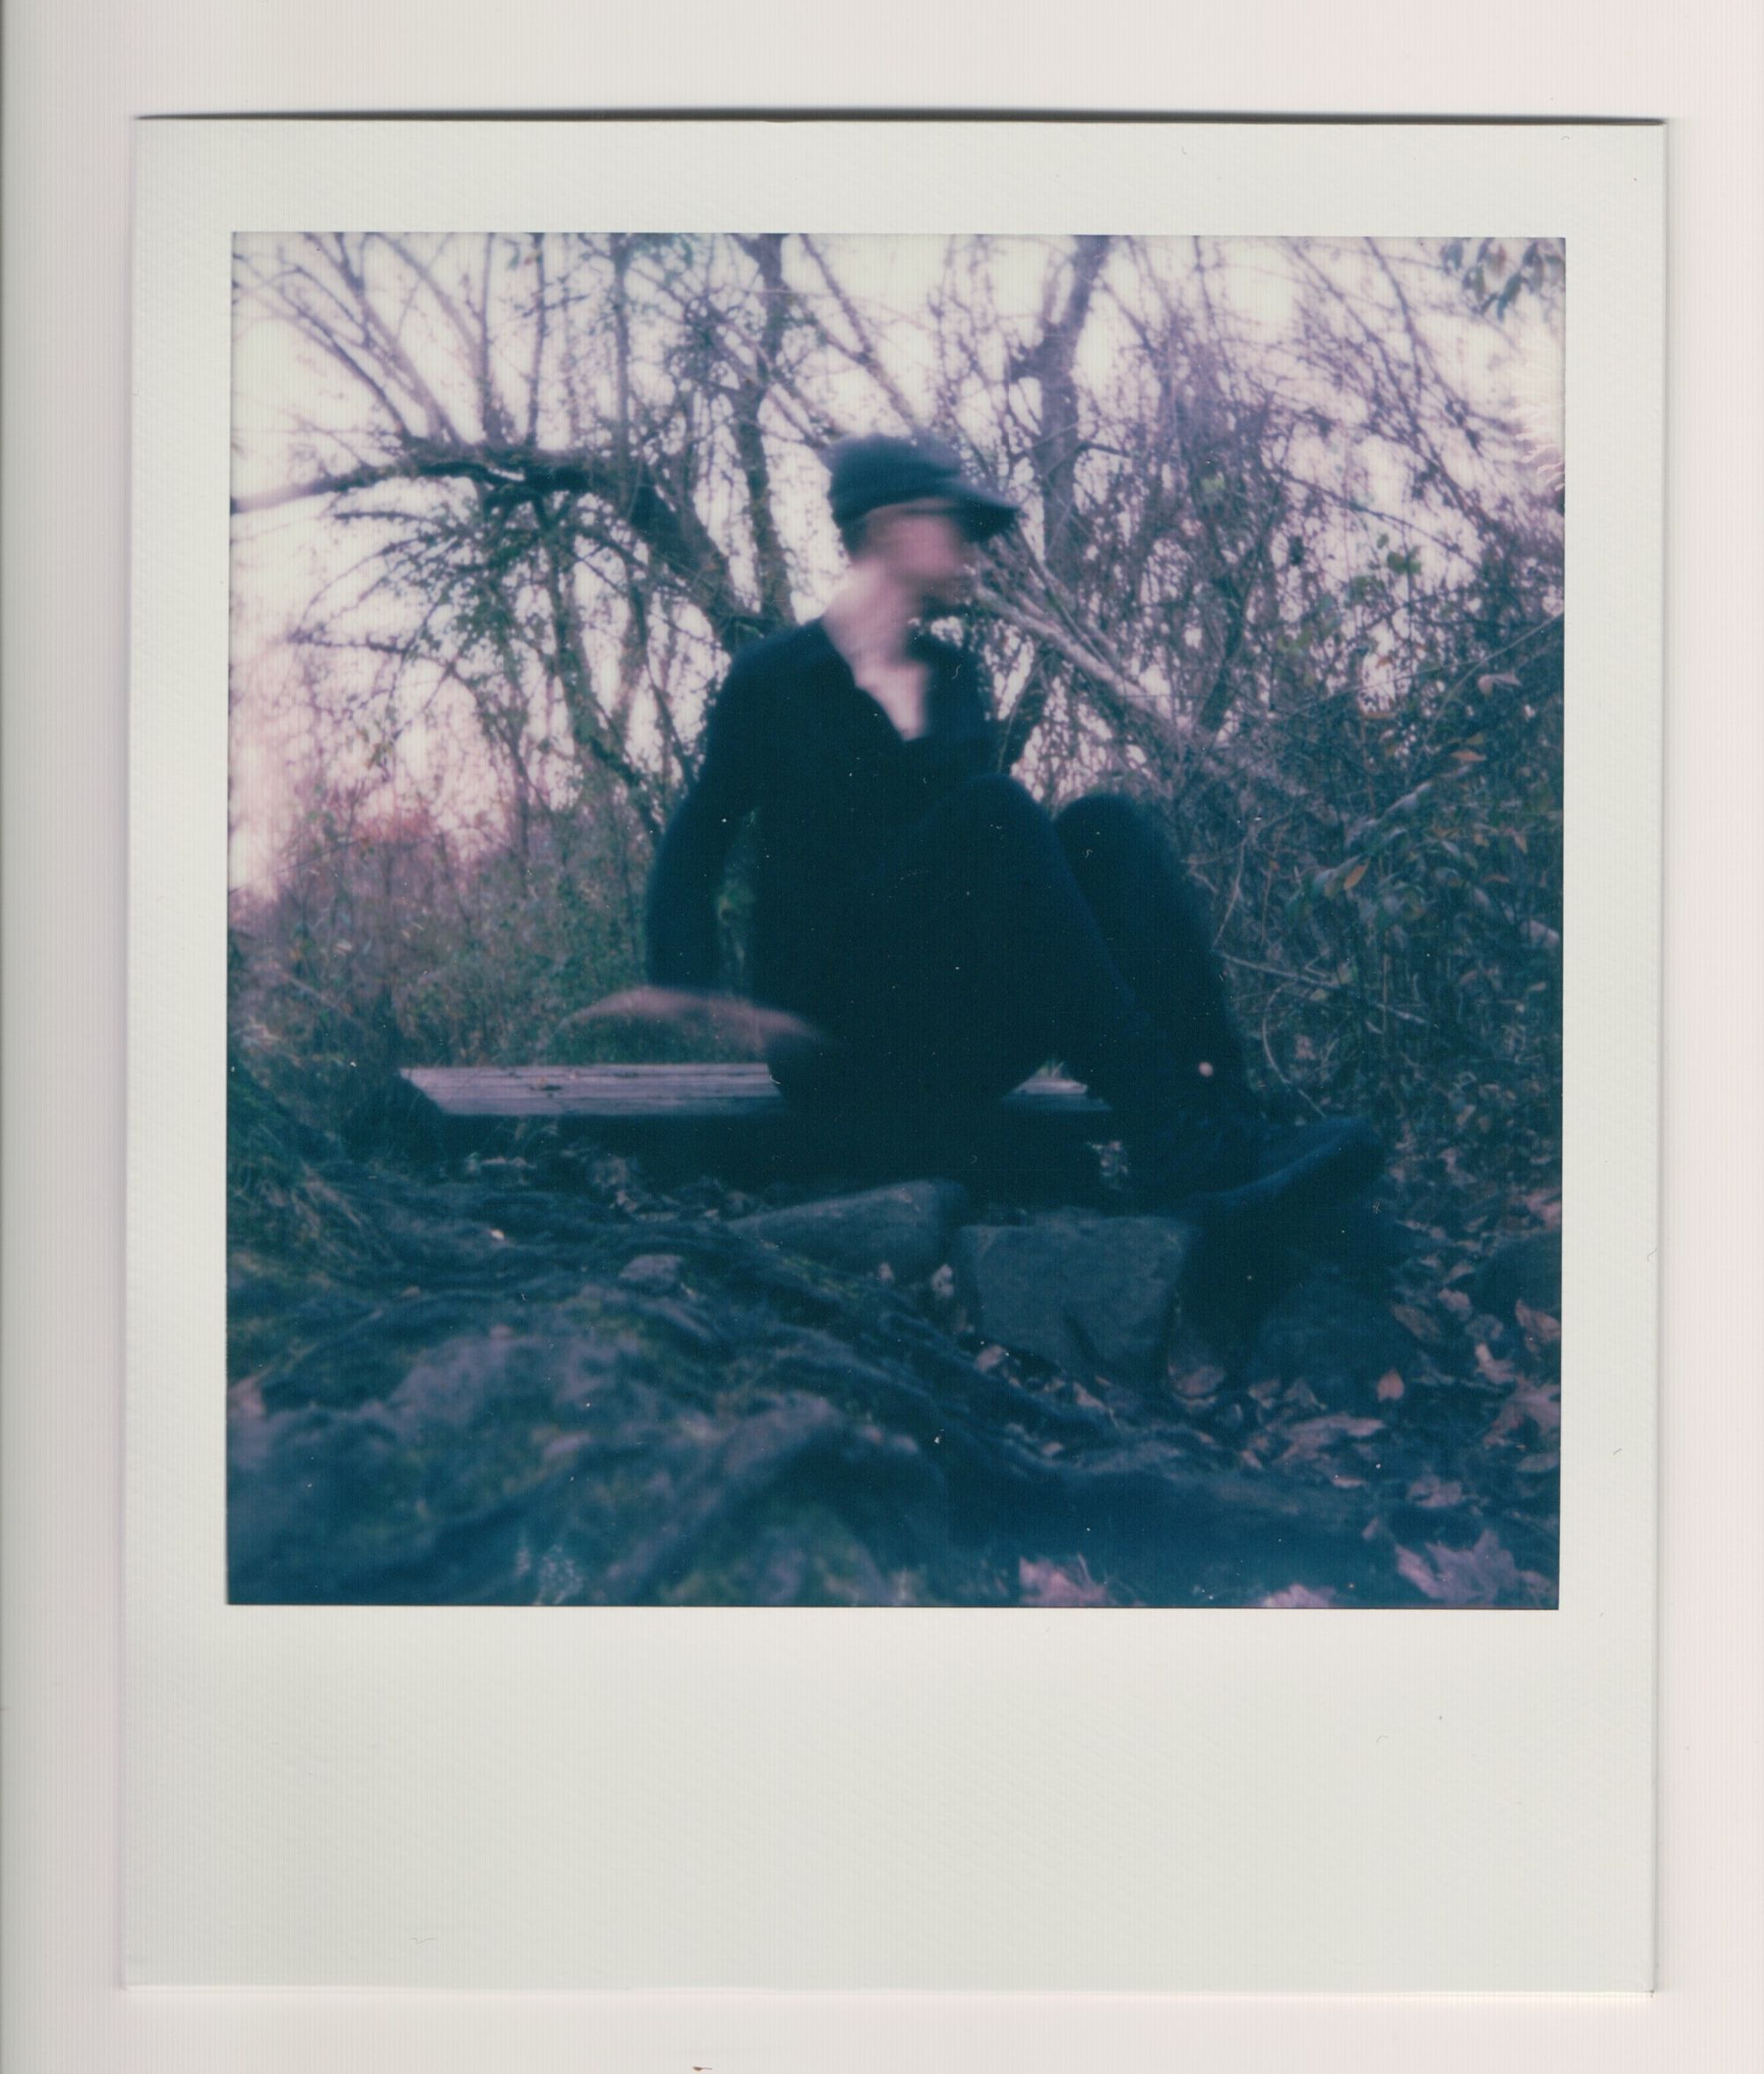 A Polaroid photo of Chris Amandier in the Salem Woods